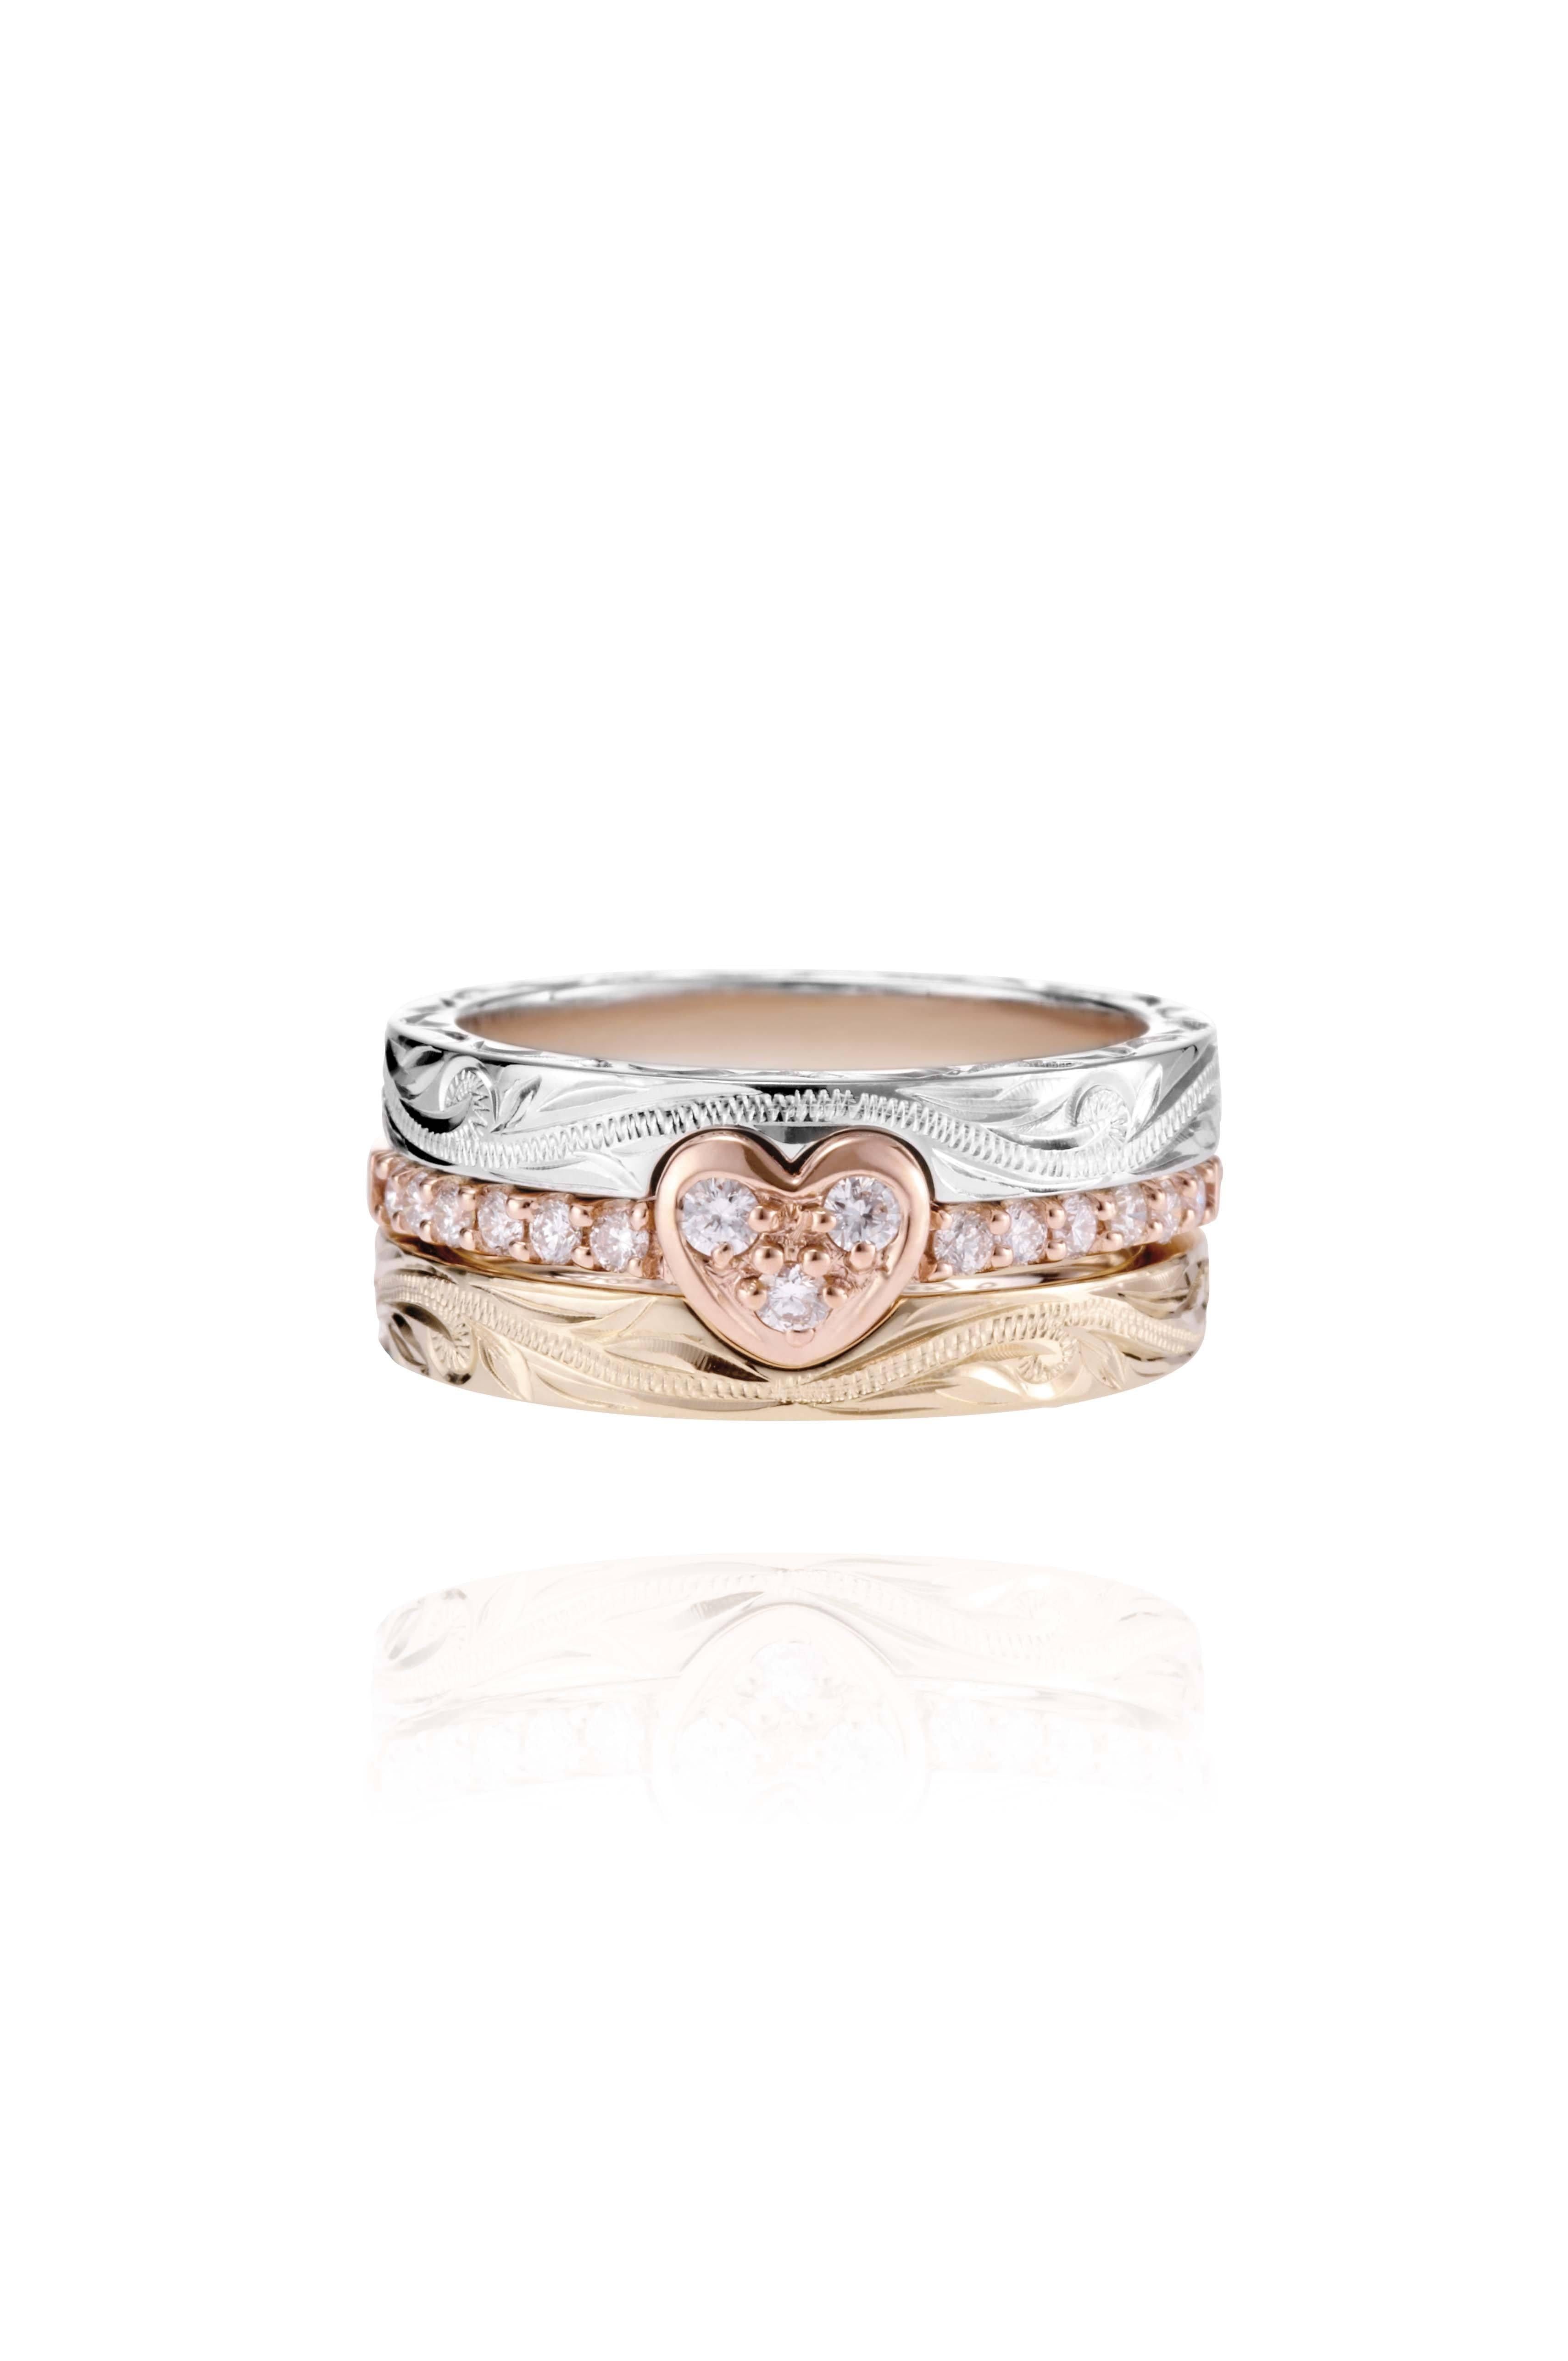 The picture shows a 14K white gold, yellow, and rose gold, tri-color rings. The rose gold heart ring features diamonds.